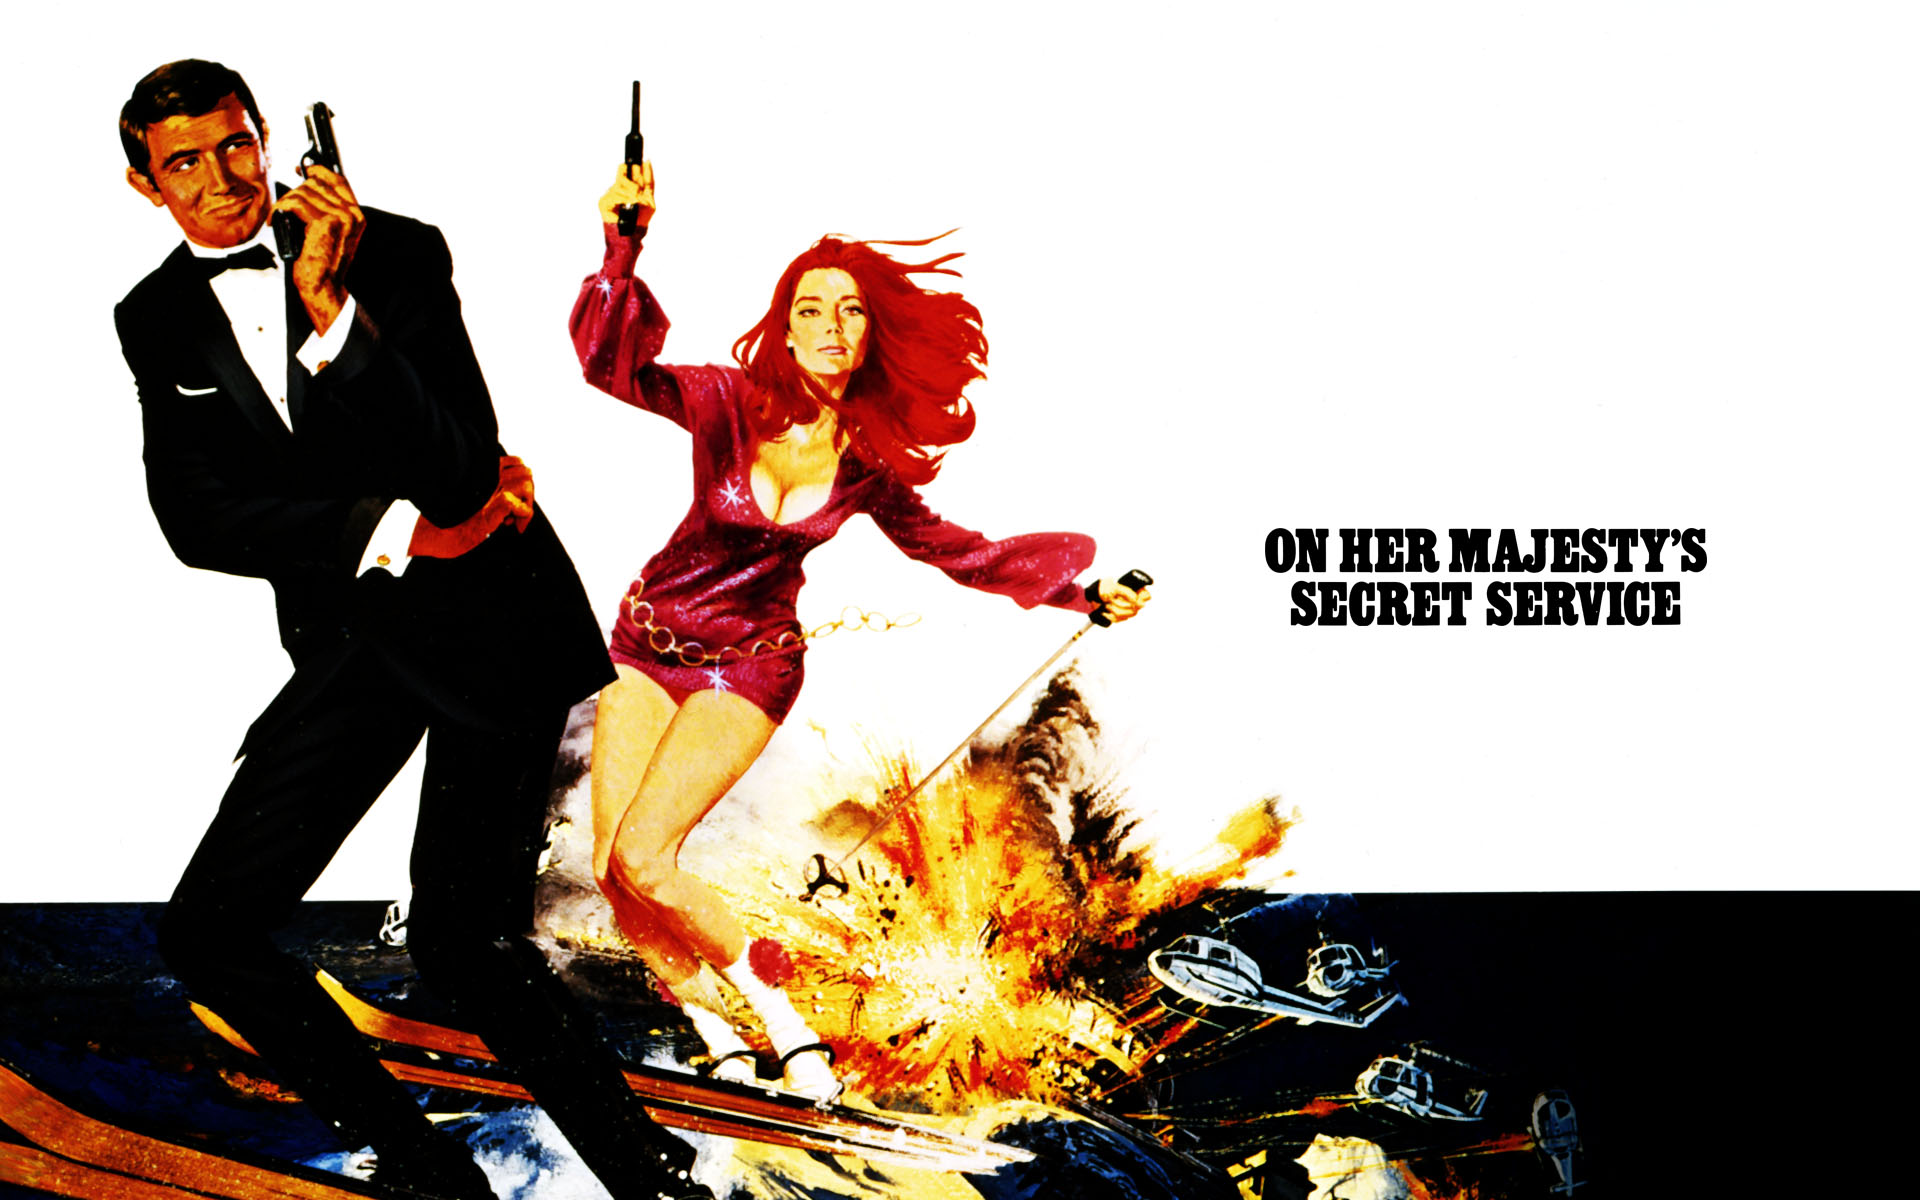 On Her Majesty's Secret Service Backgrounds, Compatible - PC, Mobile, Gadgets| 1920x1200 px